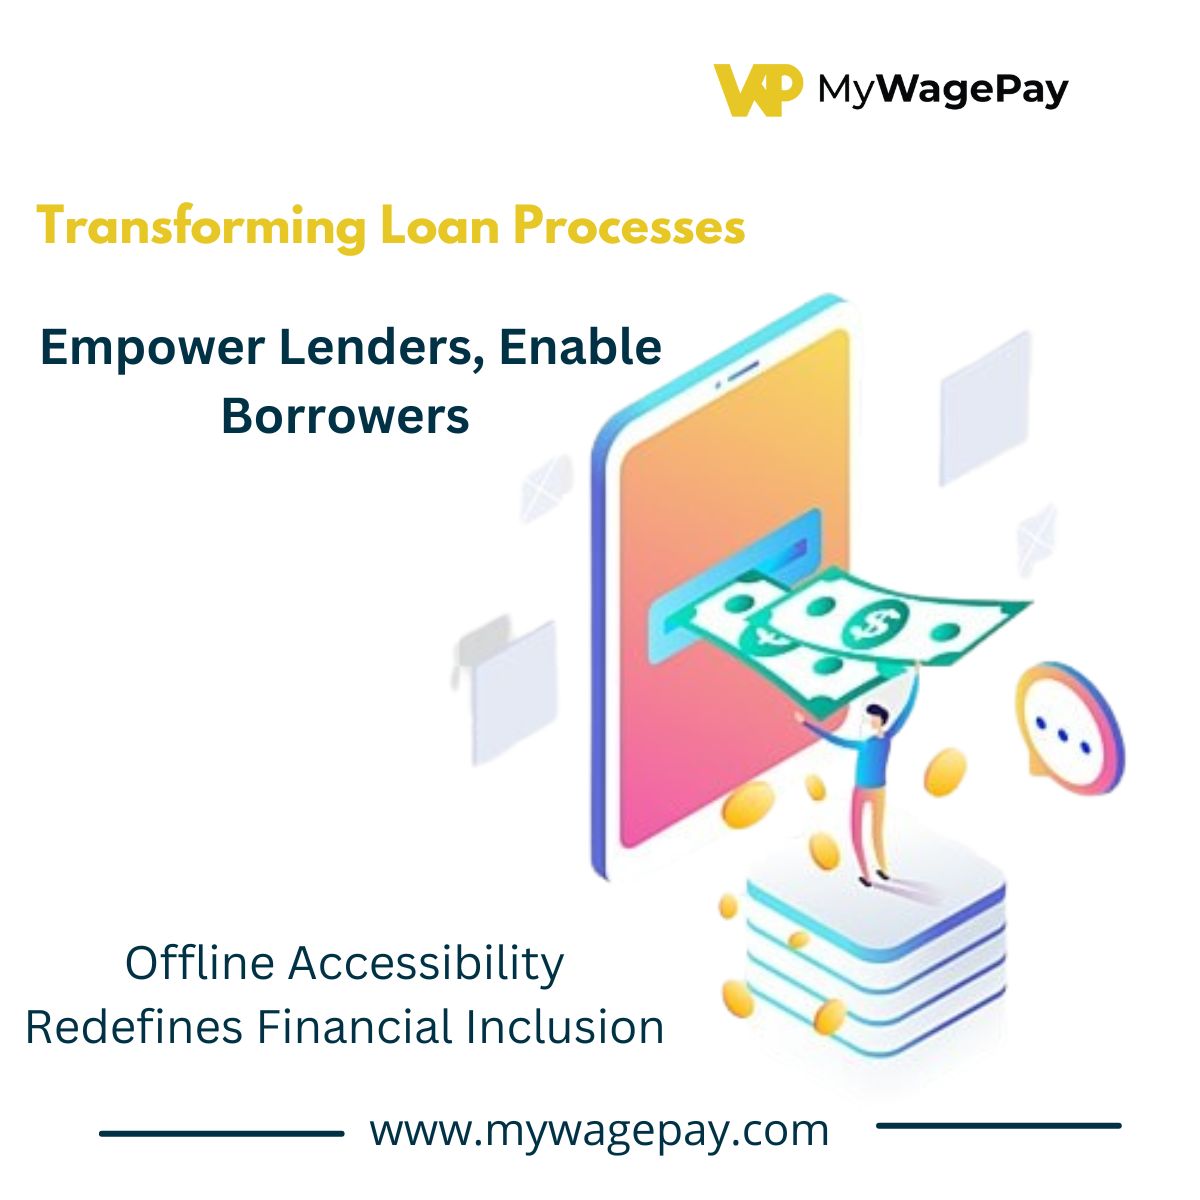 Digital lending transformed finance, yet left some behind. Our mission is to bridge gaps and unlock opportunities for all in the financial landscape.
#financialaccessibility #fintechinnovation #financeforall #Mywagepay
lnkd.in/ePjHSwwb